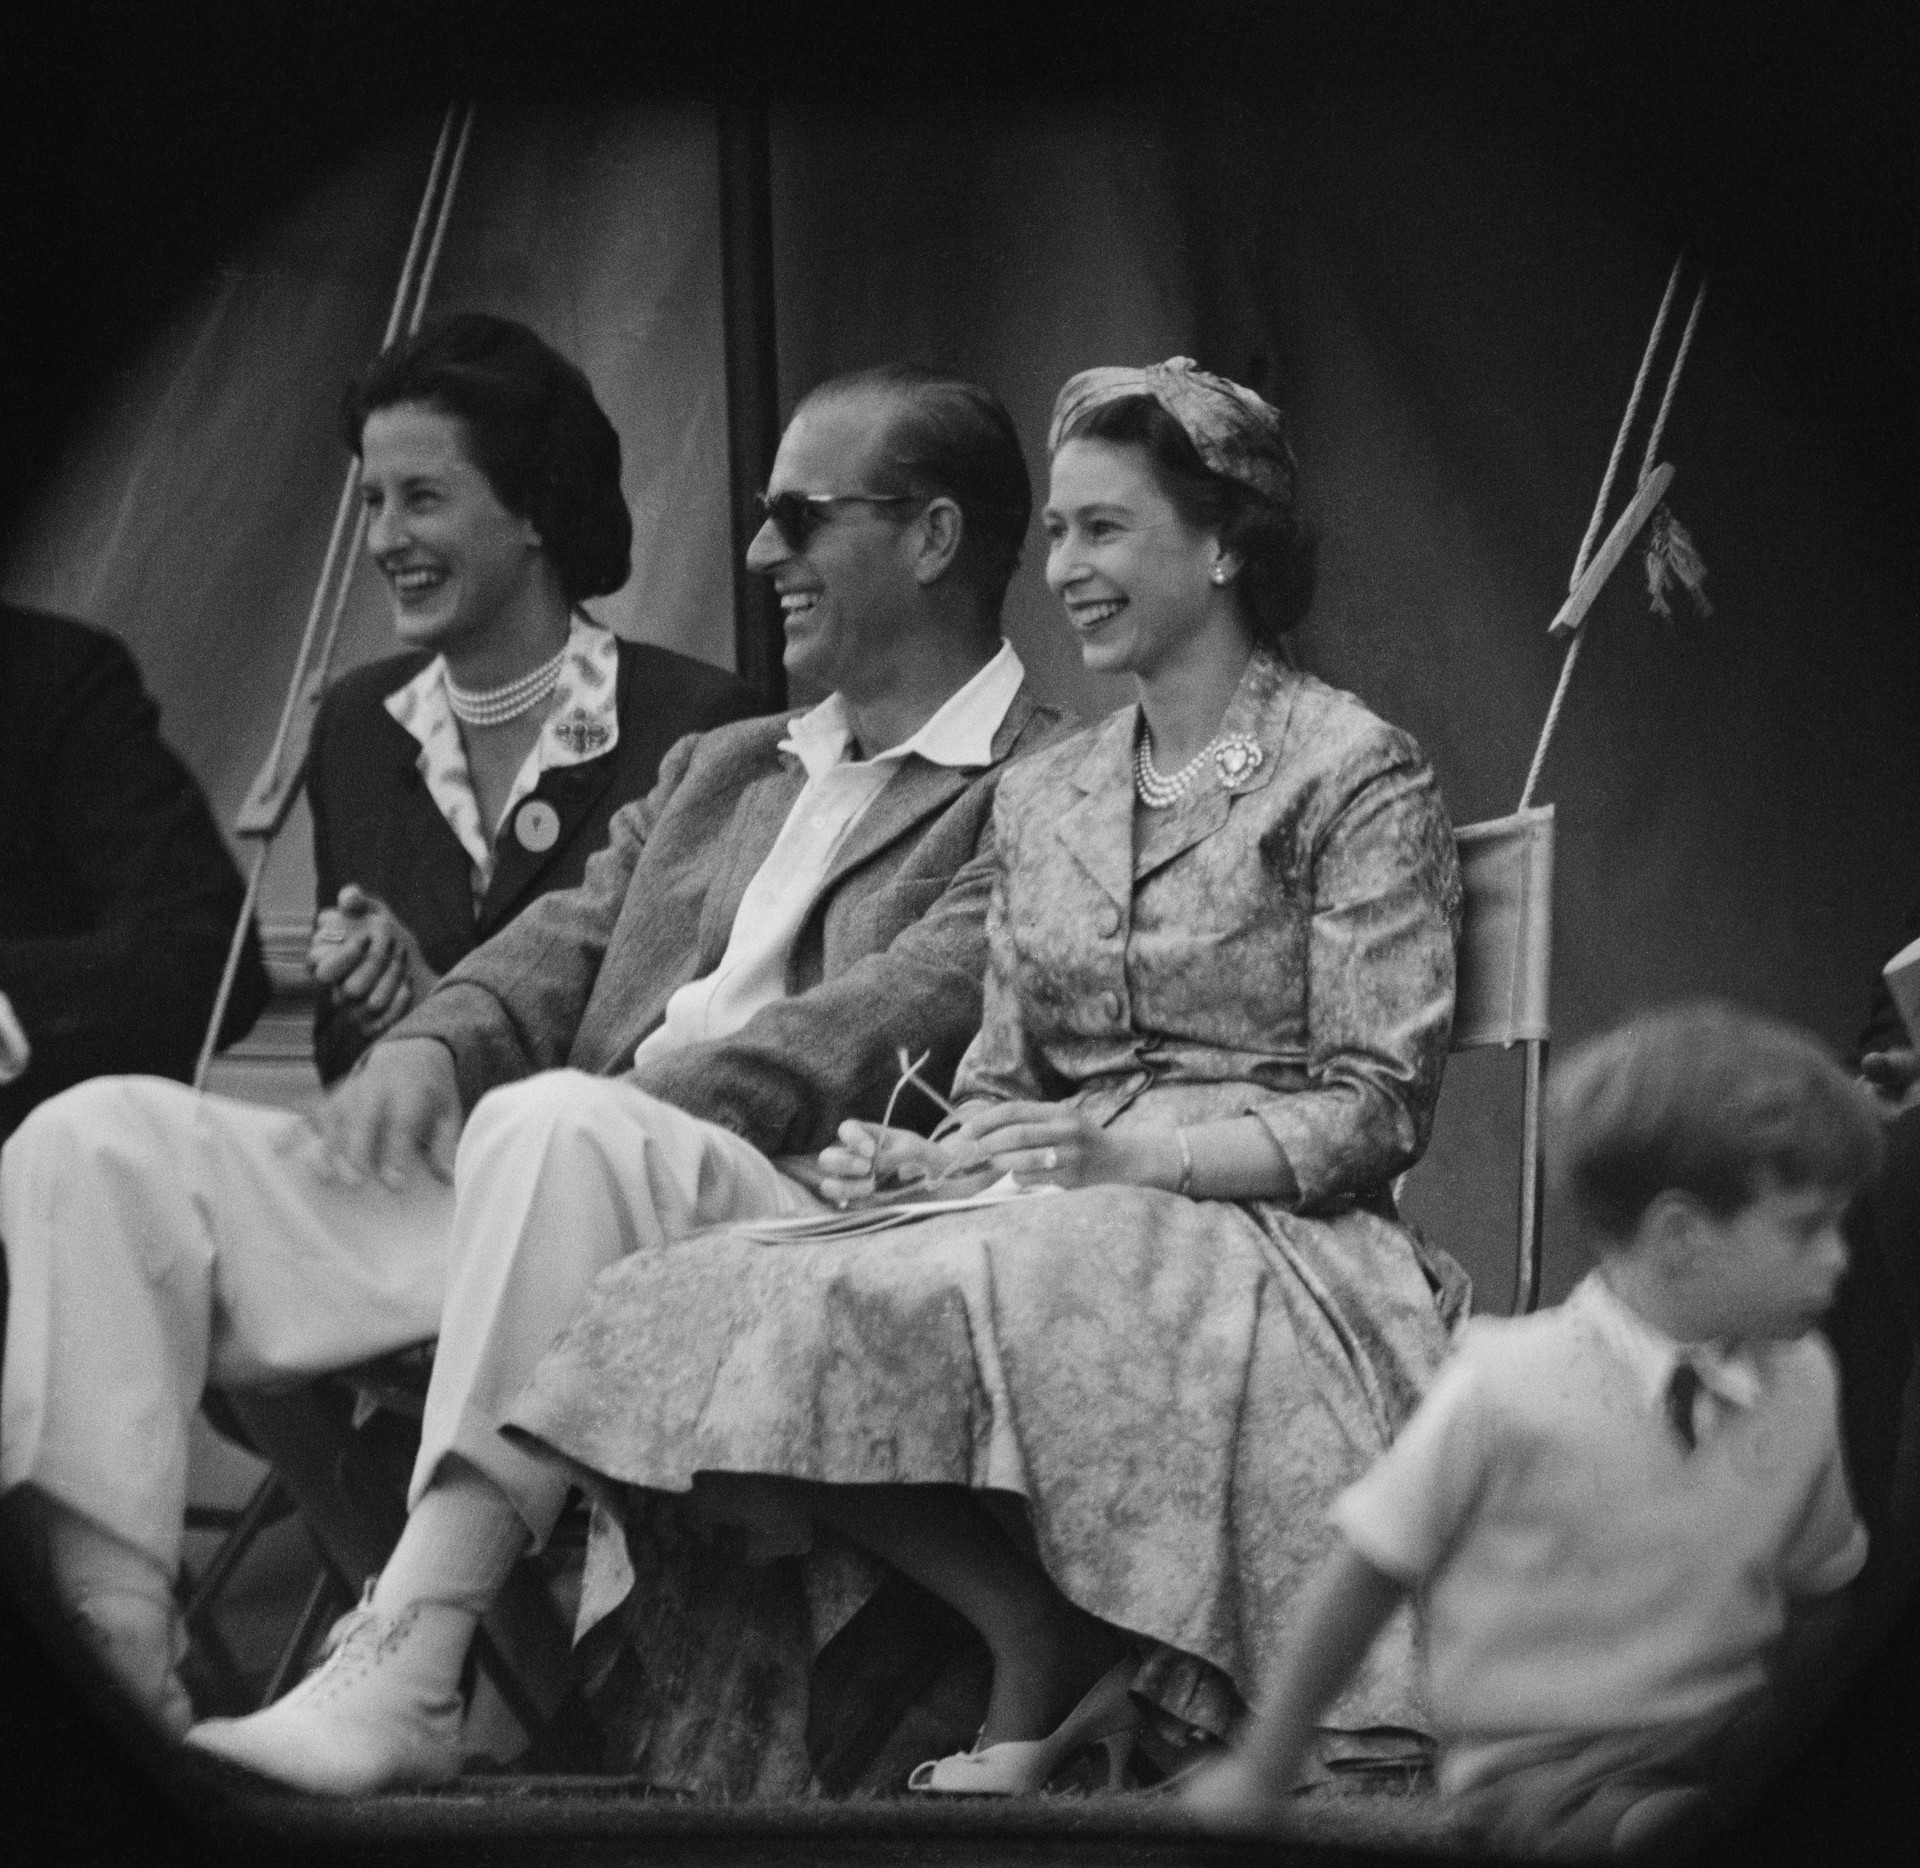 Queen Elizabeth II and Prince Philip, Duke of Edinburgh watch a cricket match at Highclere Castle. <p>You may also like:<a href="https://www.starsinsider.com/n/226935?utm_source=msn.com&utm_medium=display&utm_campaign=referral_description&utm_content=202921v11en-nz"> Could these be the lost books of the Bible?</a></p>